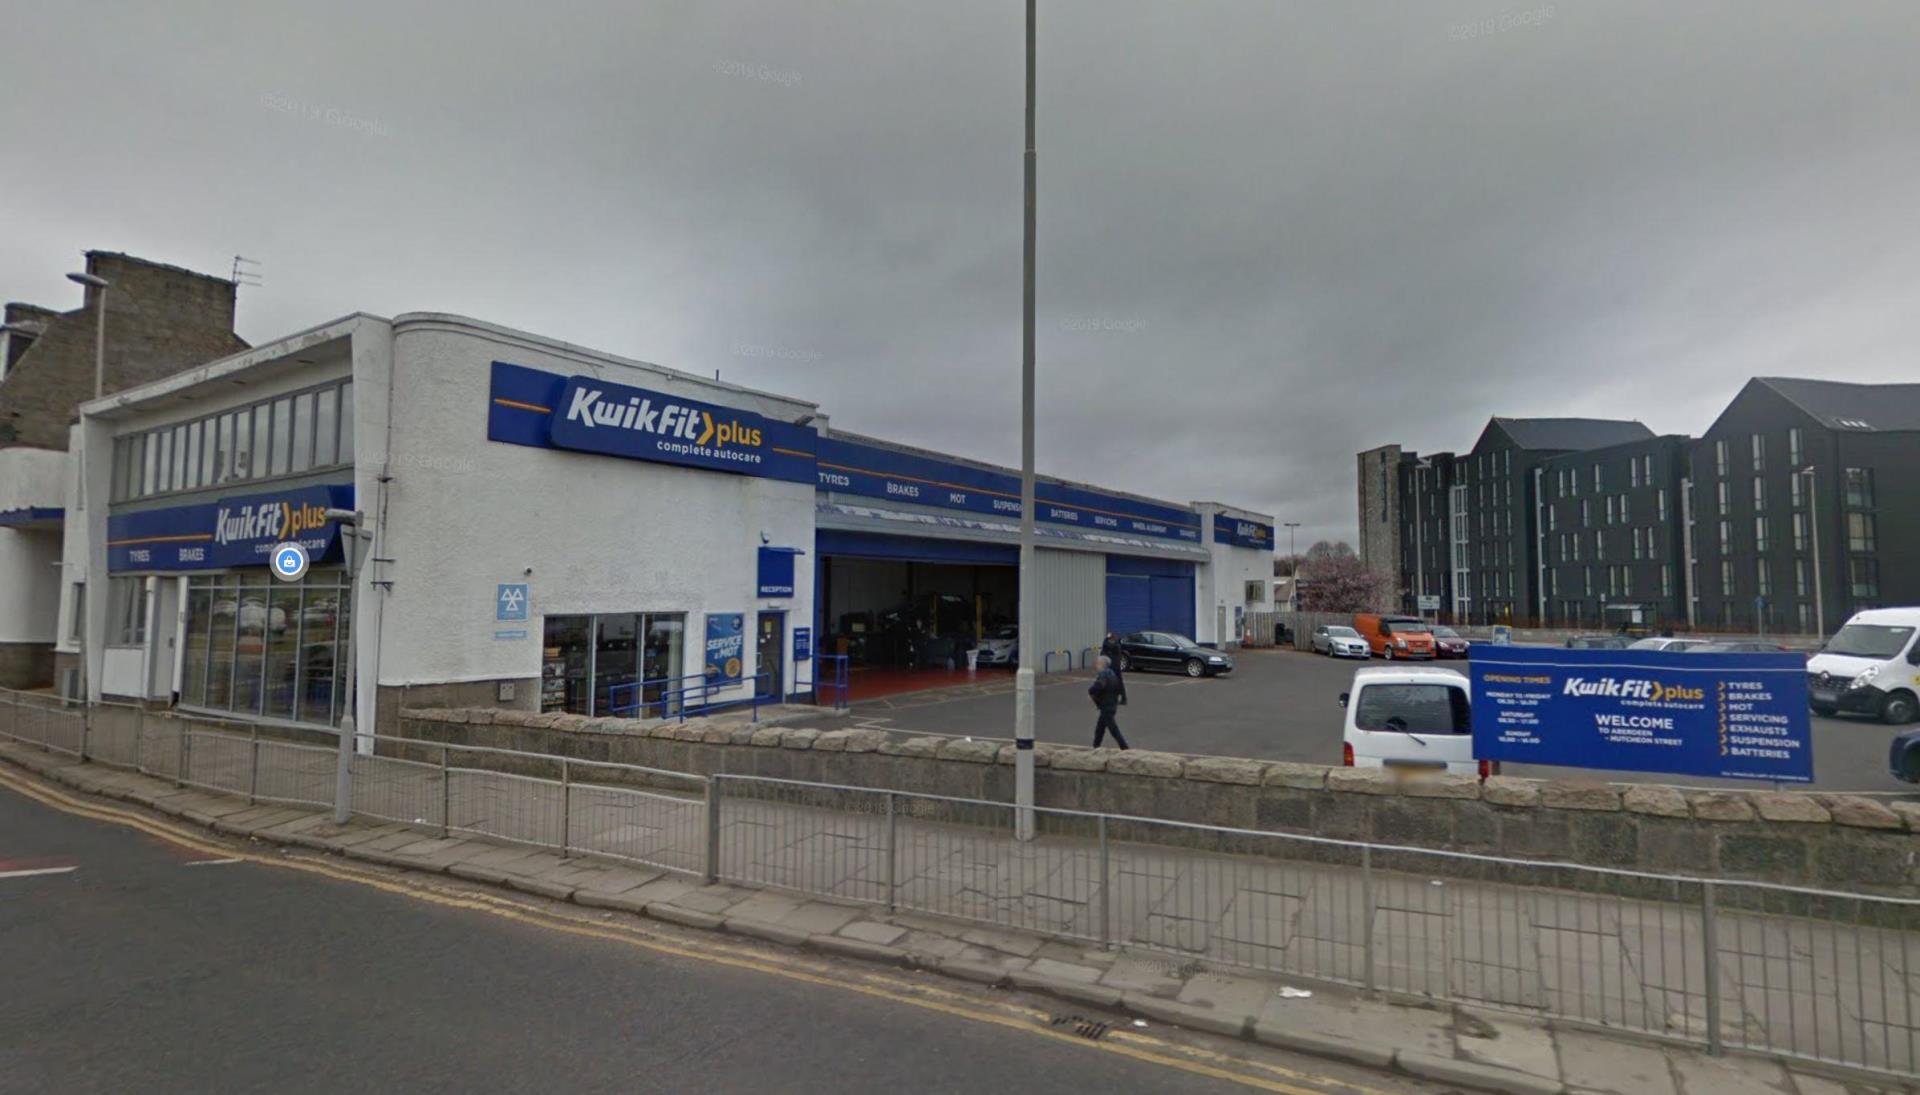 Staff at Aberdeen garage self isolating following positive case